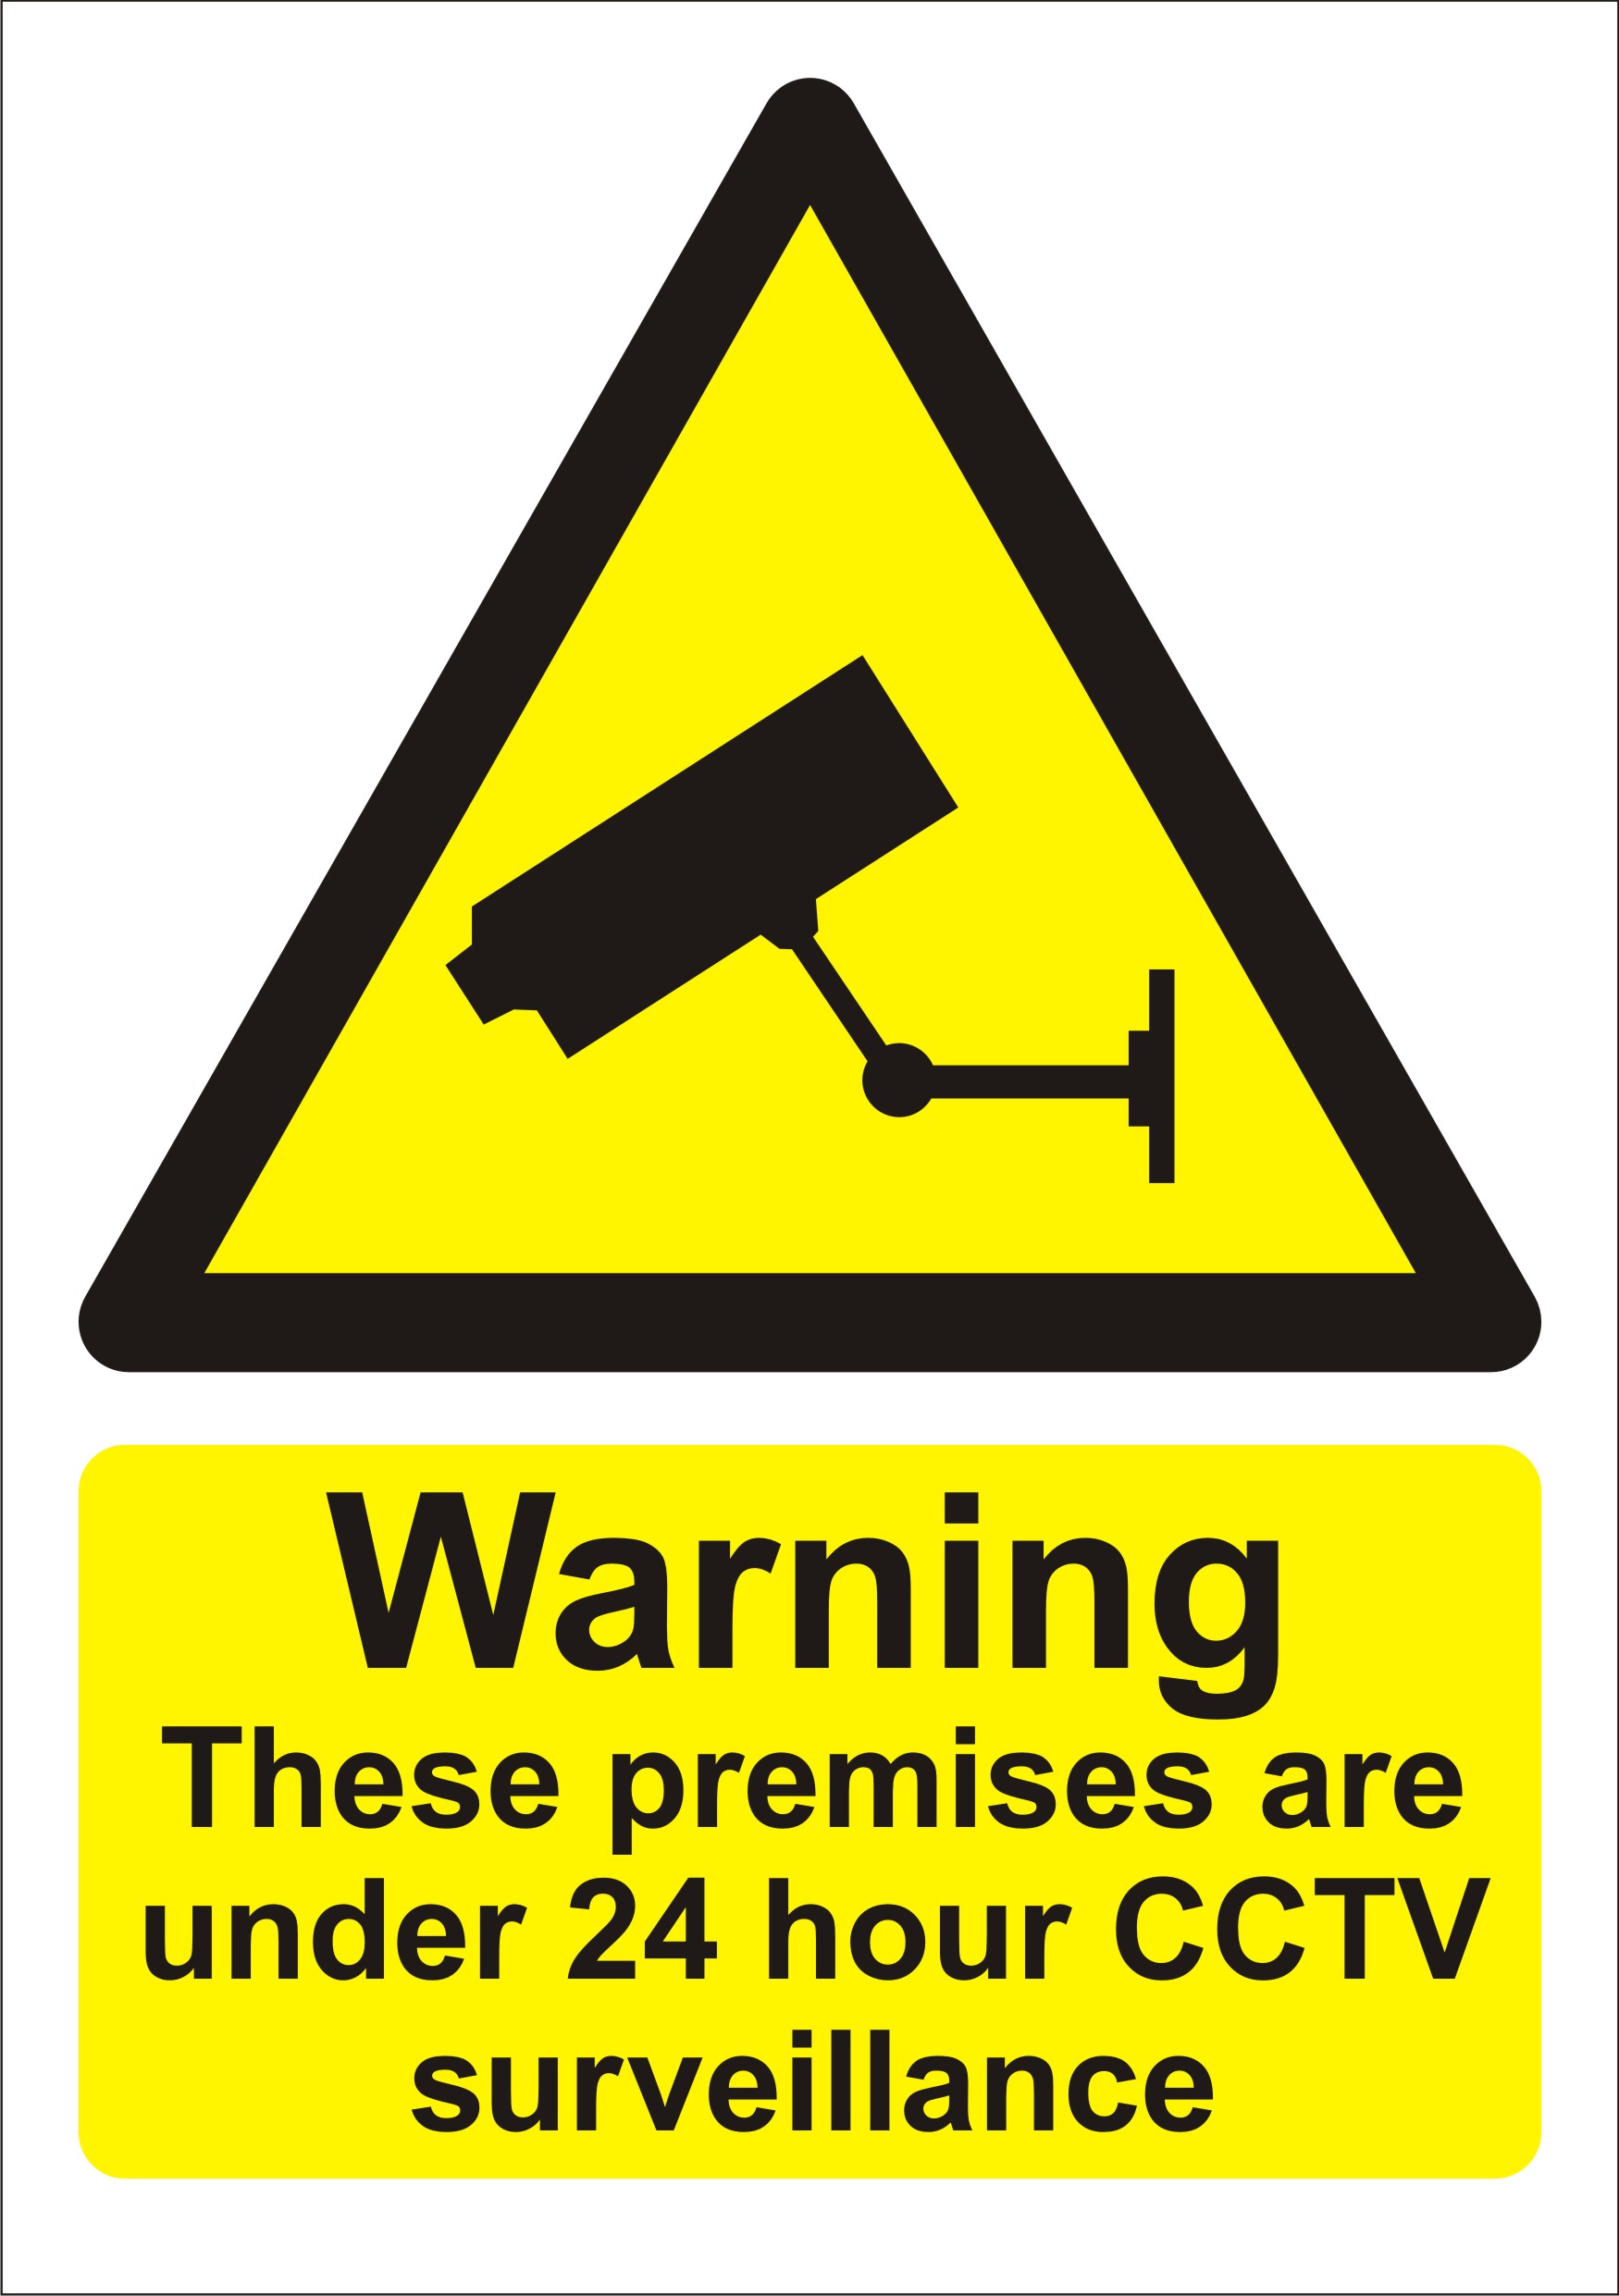 http://www.channelsafety.co.uk/wp-content/uploads/2012/11/cctv-warning-sign.jpg